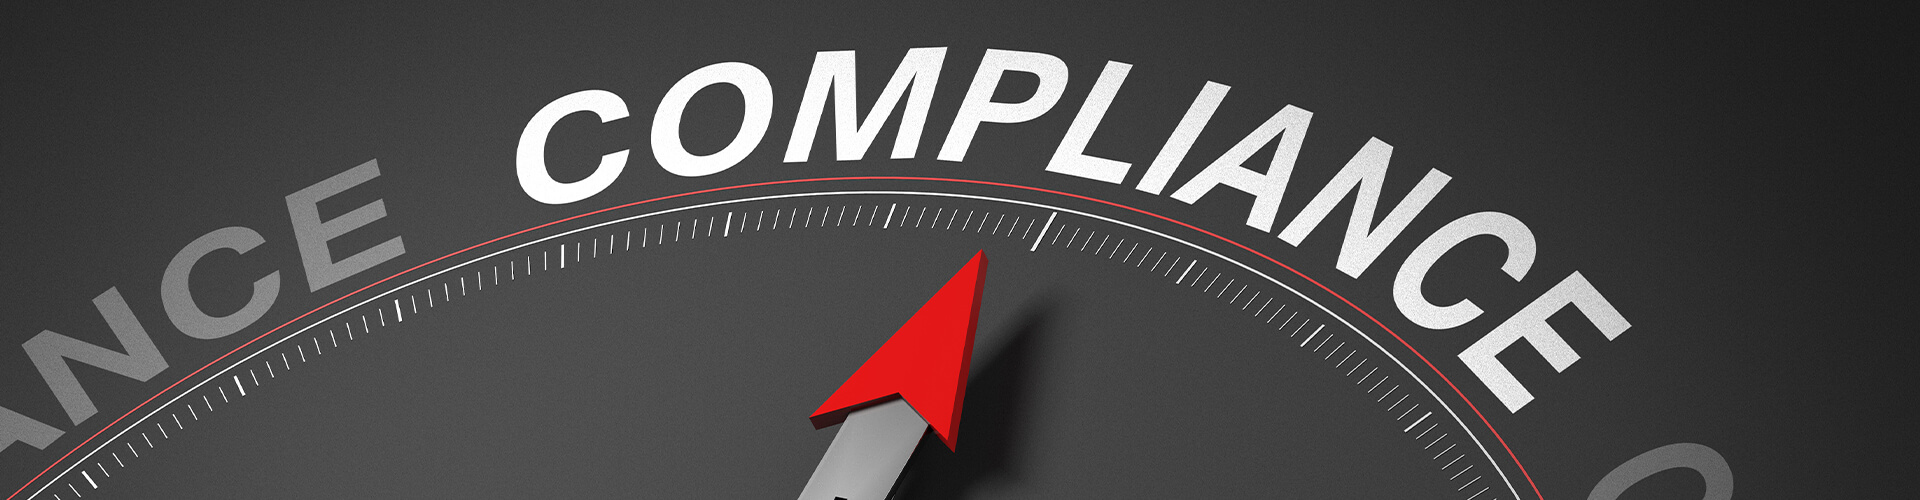 Common Compliance mistakes and how to overcome them.